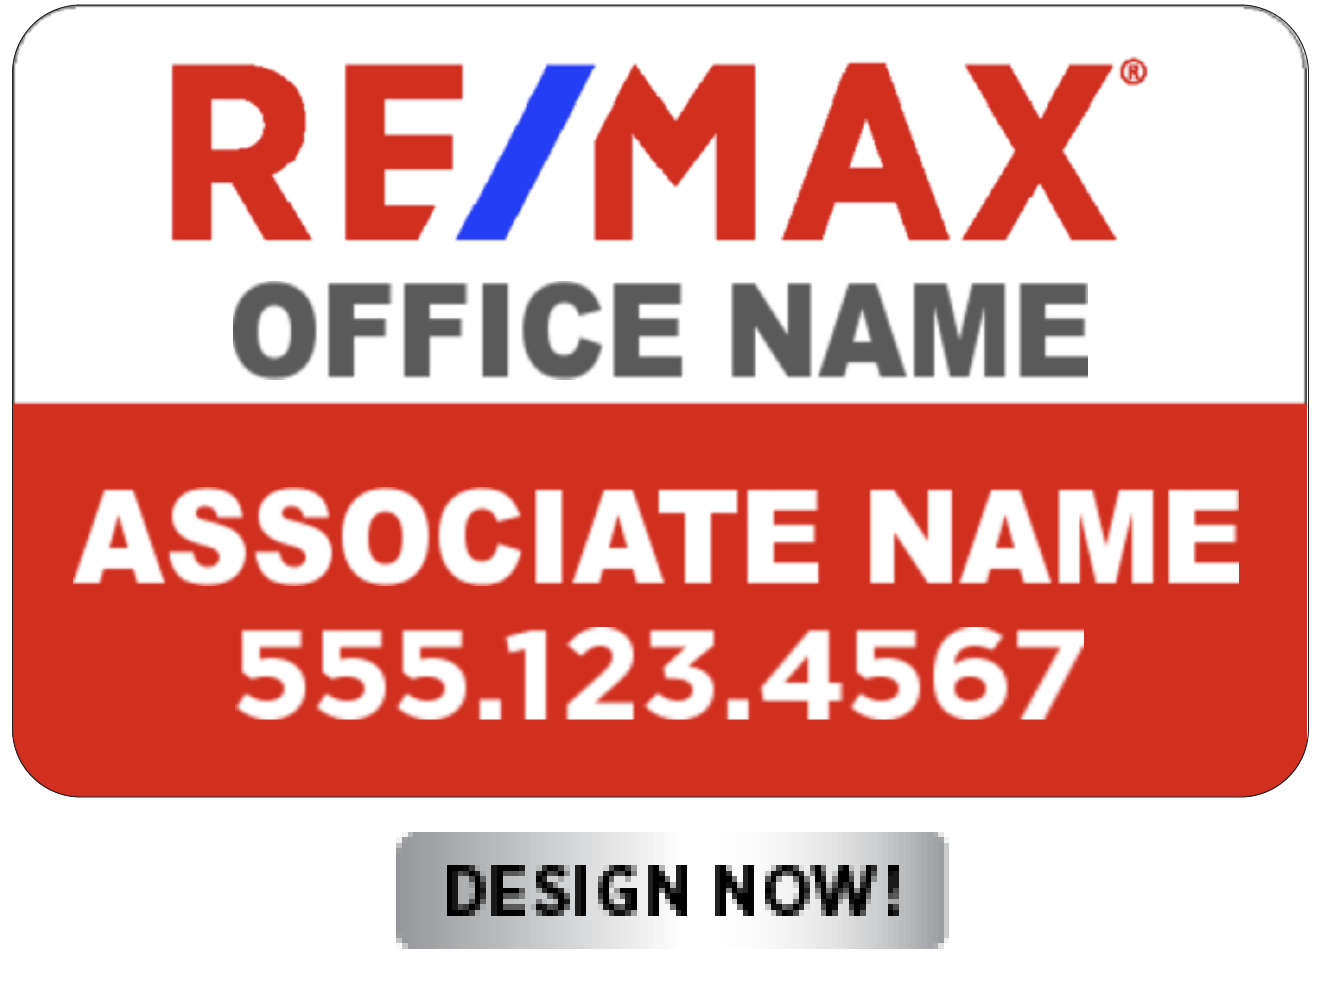 remax11x18magnetredwhiterevised.png